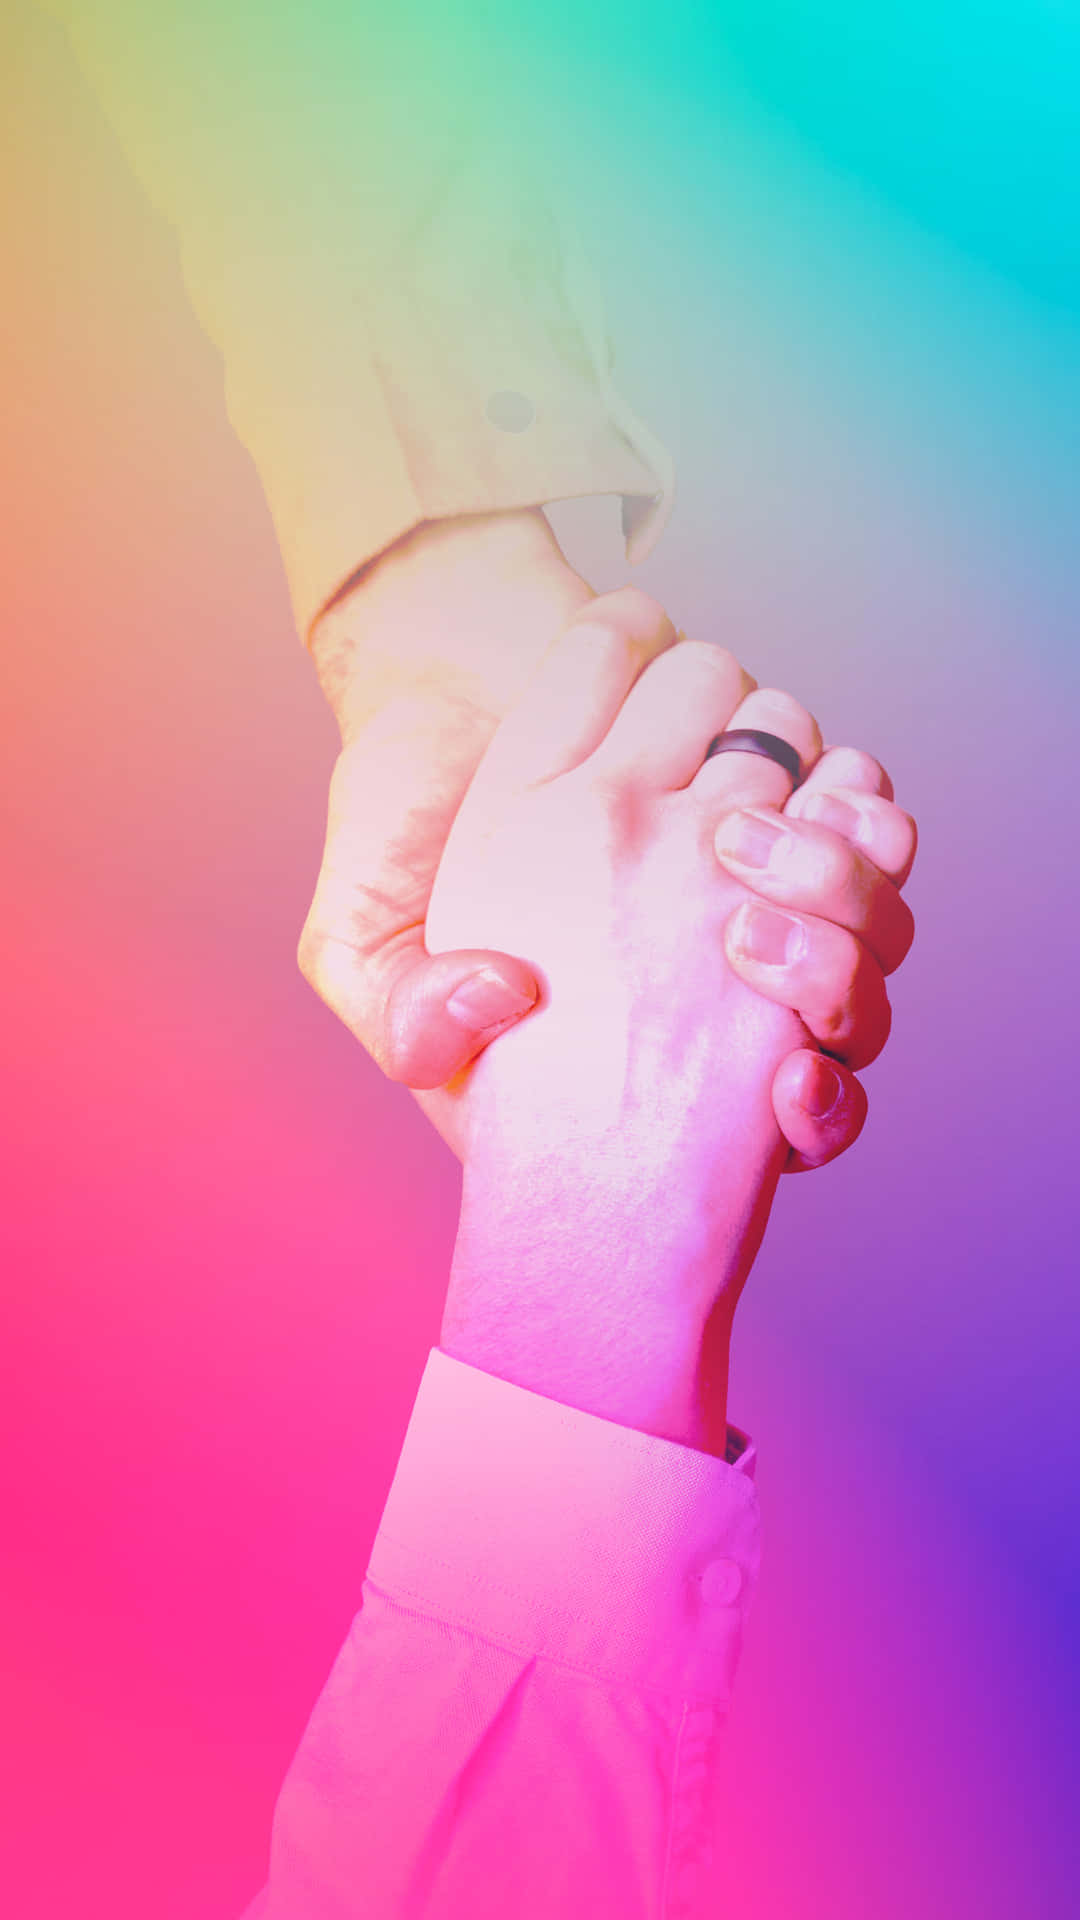 Handshake With Colorful Gradient Picture